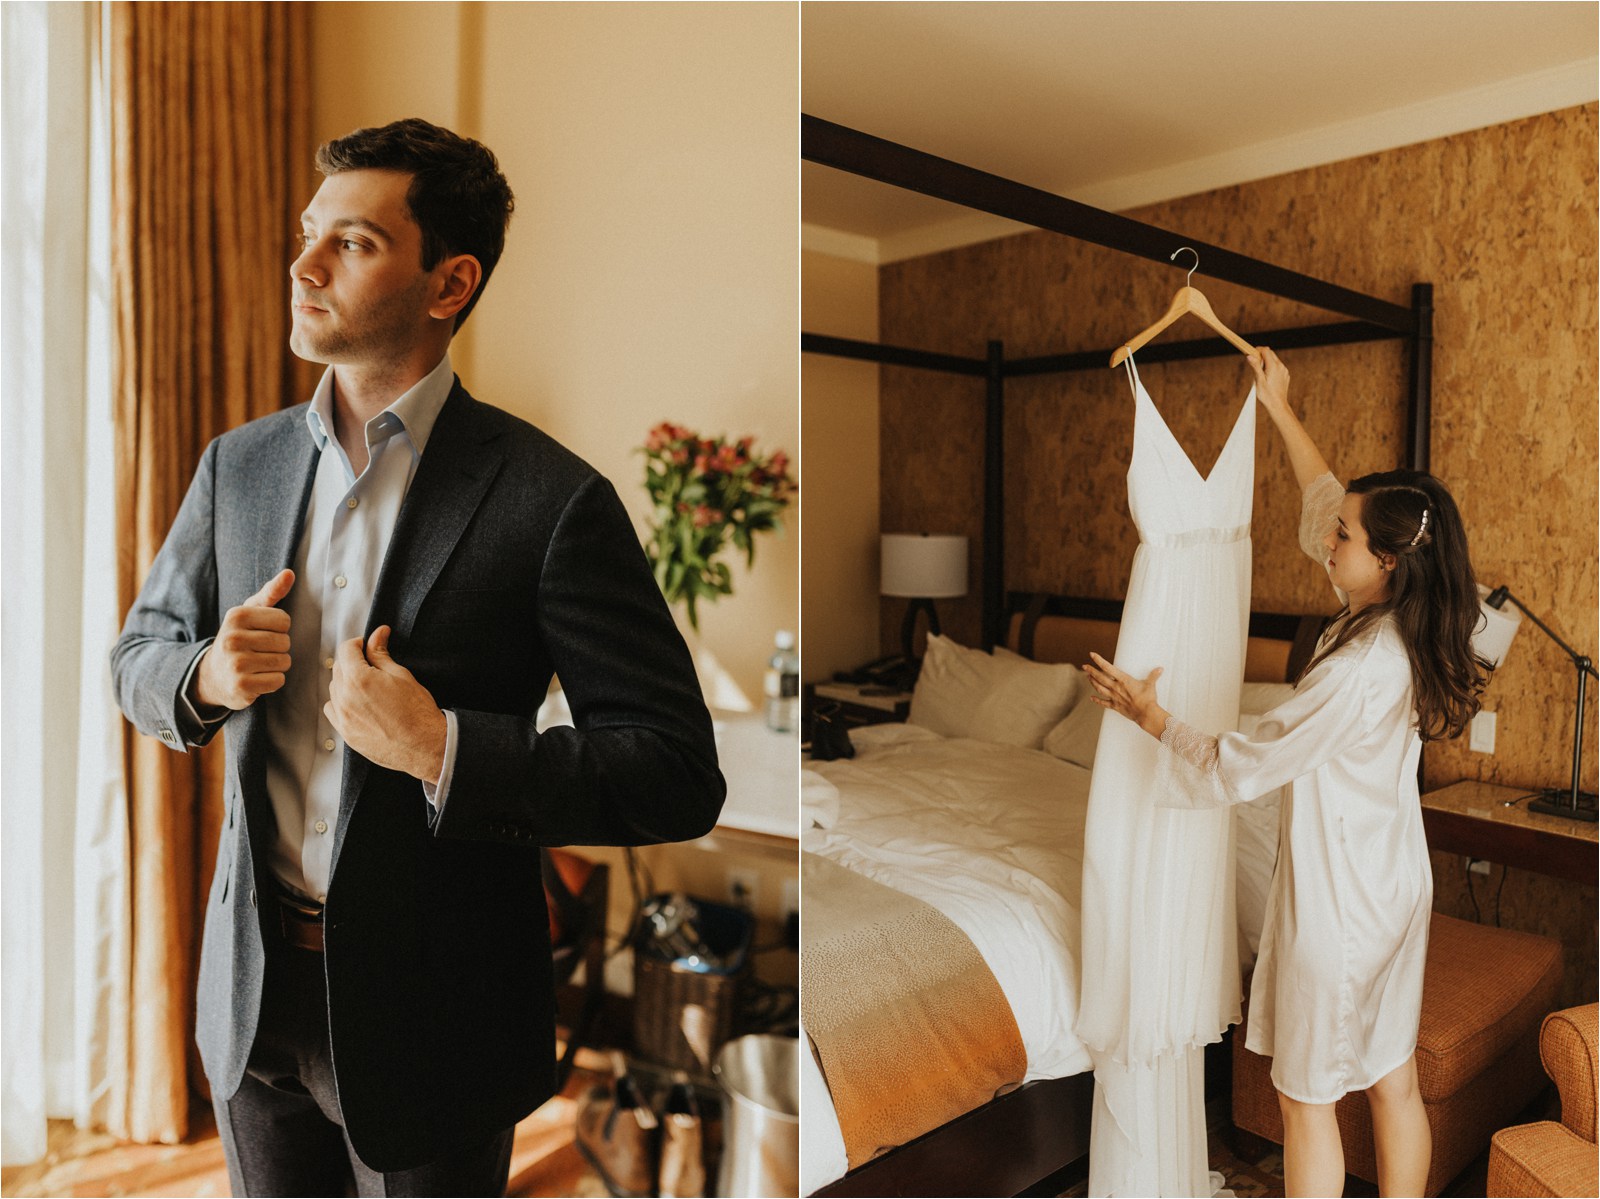 Harry, the groom, in the hotel room getting his suit on while waiting for his bride. Erin, the bride, getting her dress off the hanger to get dressed.